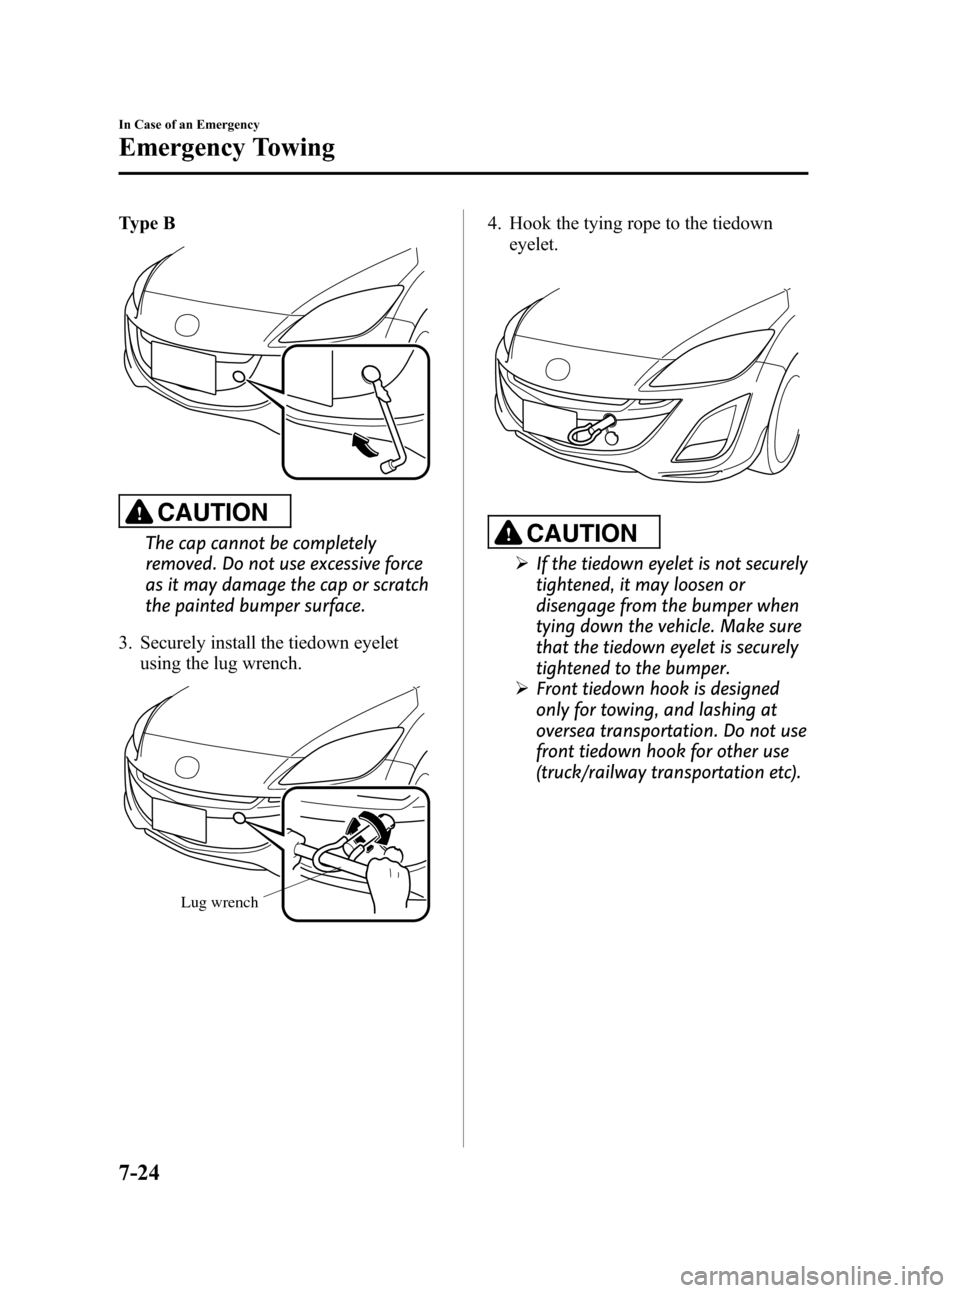 MAZDA MODEL 3 HATCHBACK 2010  Owners Manual (in English) Black plate (362,1)
Type B
CAUTION
The cap cannot be completely
removed. Do not use excessive force
as it may damage the cap or scratch
the painted bumper surface.
3. Securely install the tiedown eyel